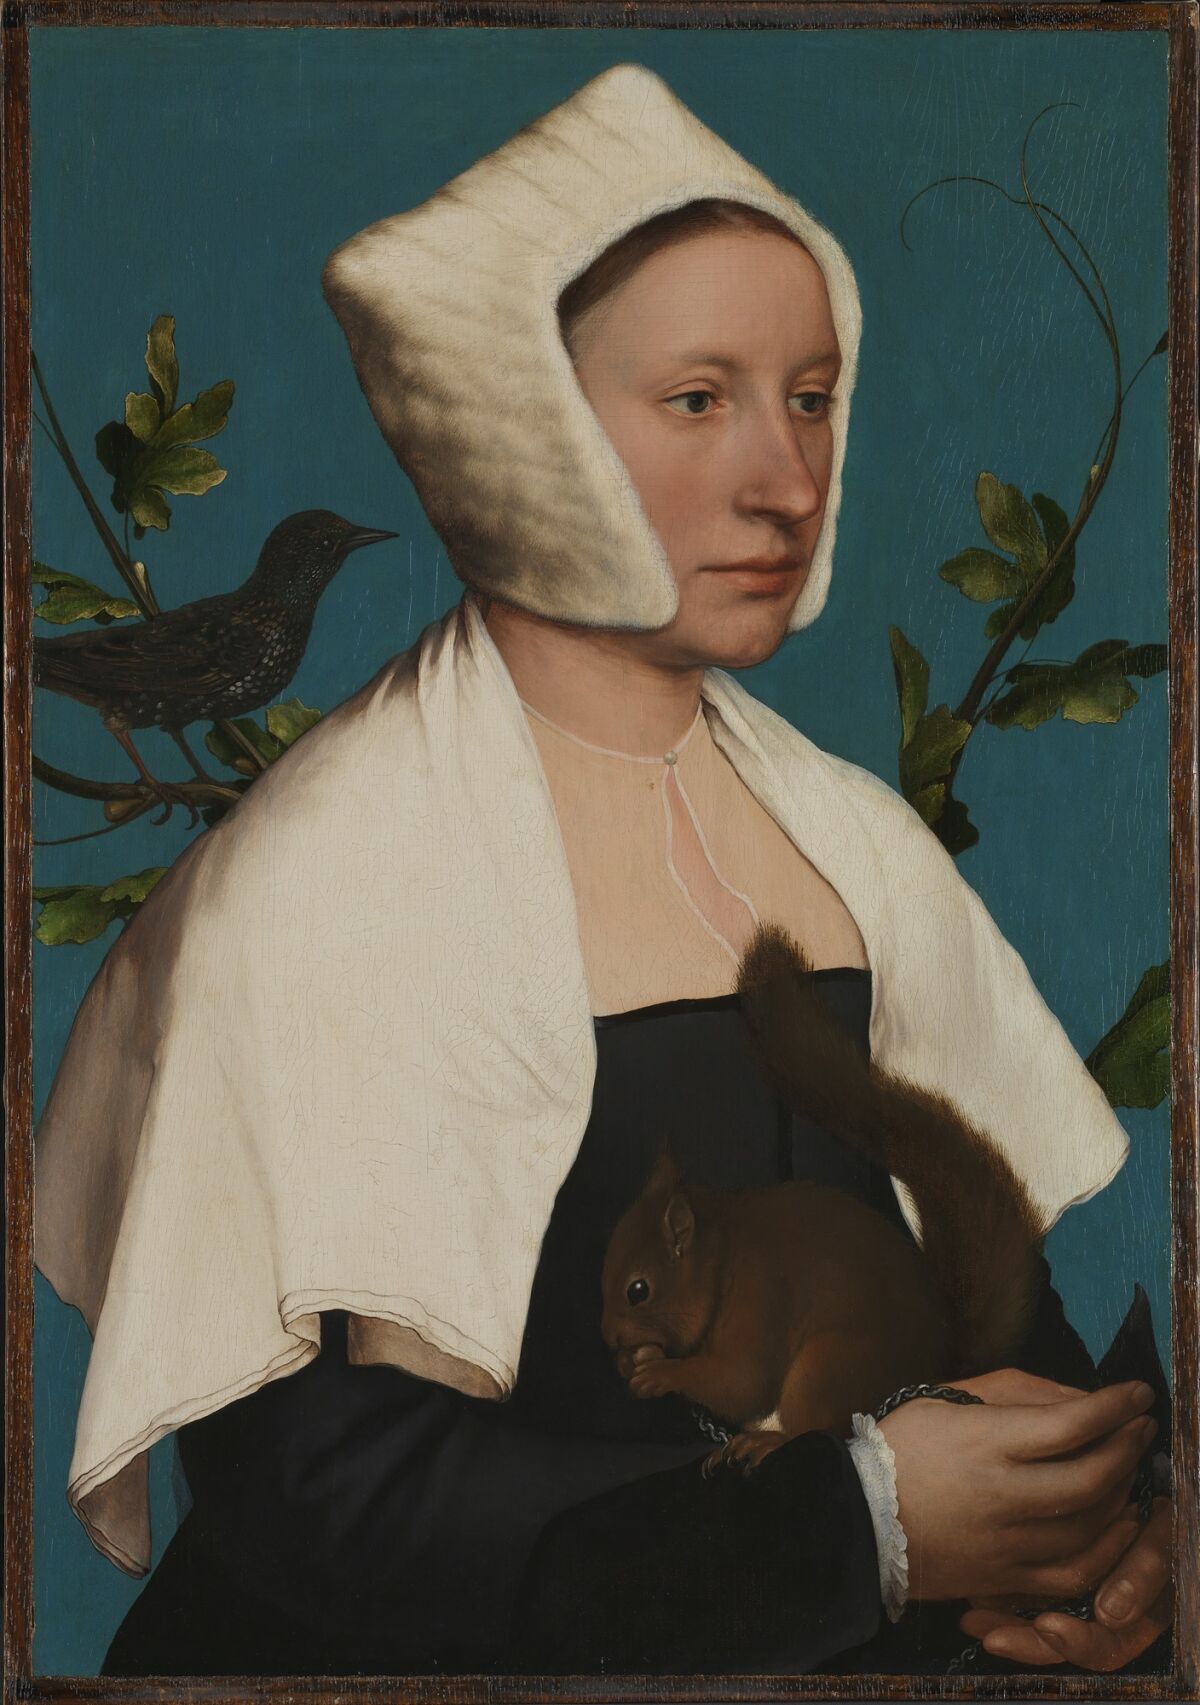 A woman in a painting with a bird on her shoulder and a squirrel in her hand.